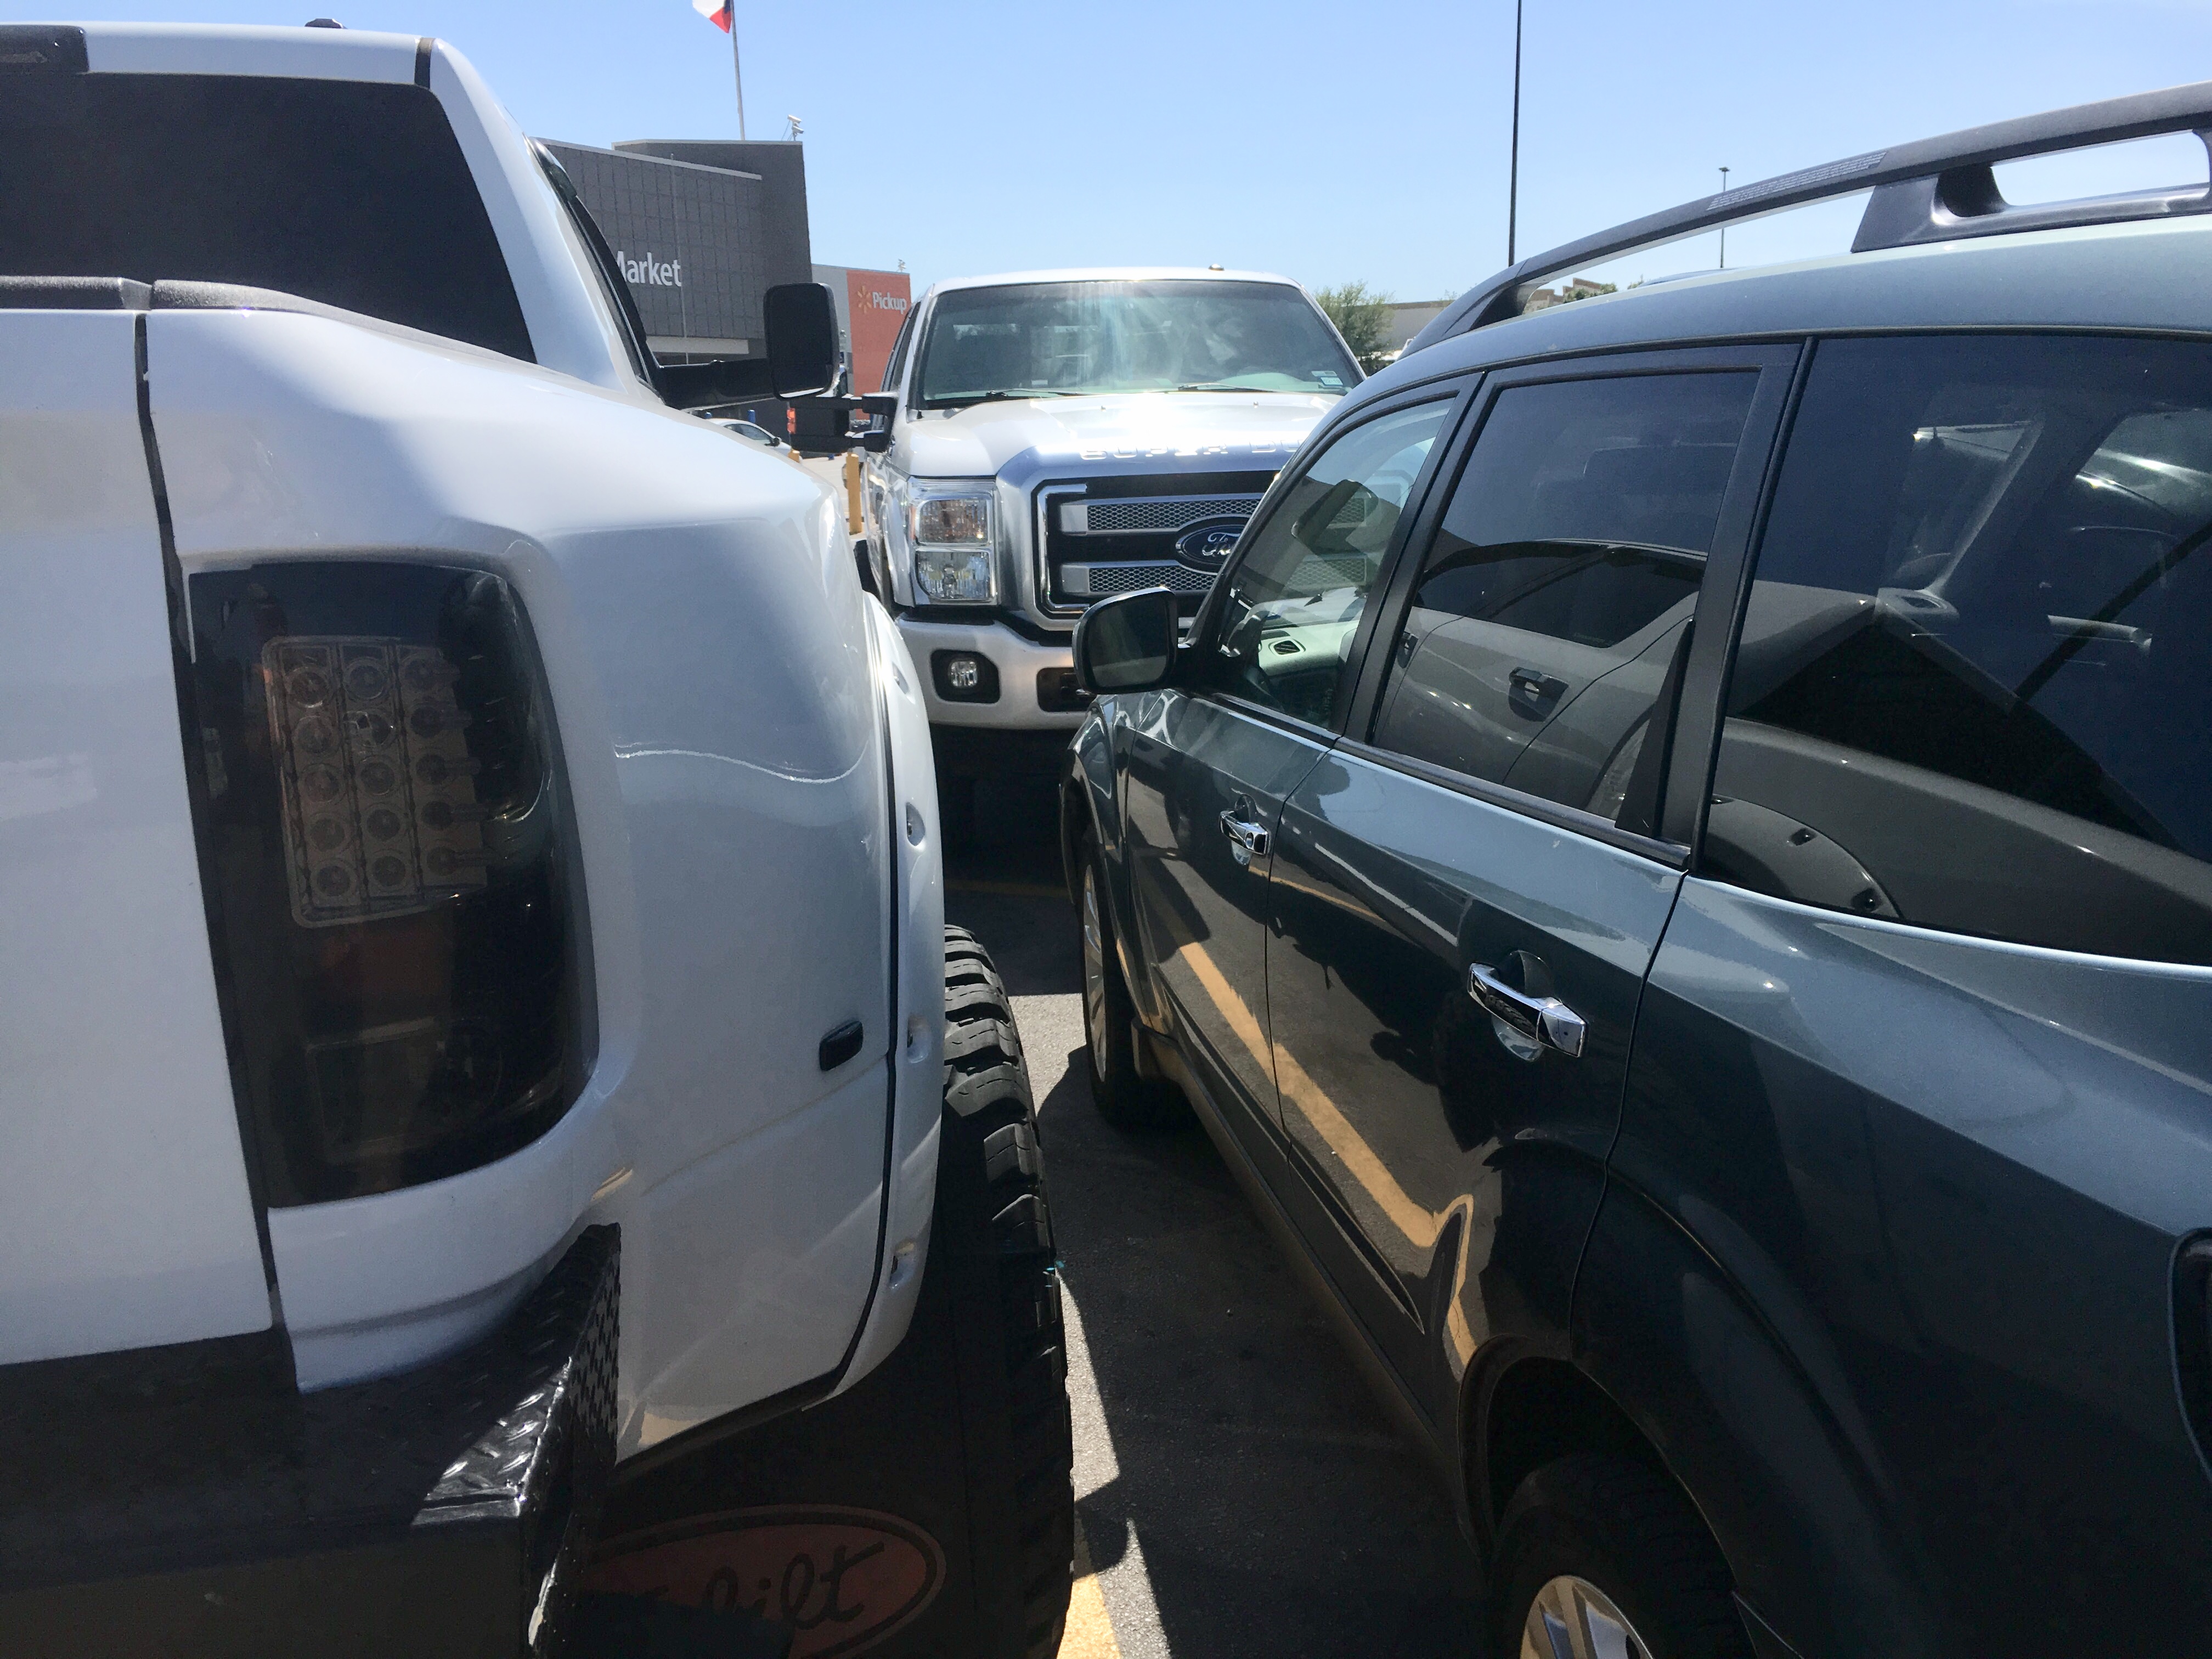 Dually pickup almost wider than the parking space. photo